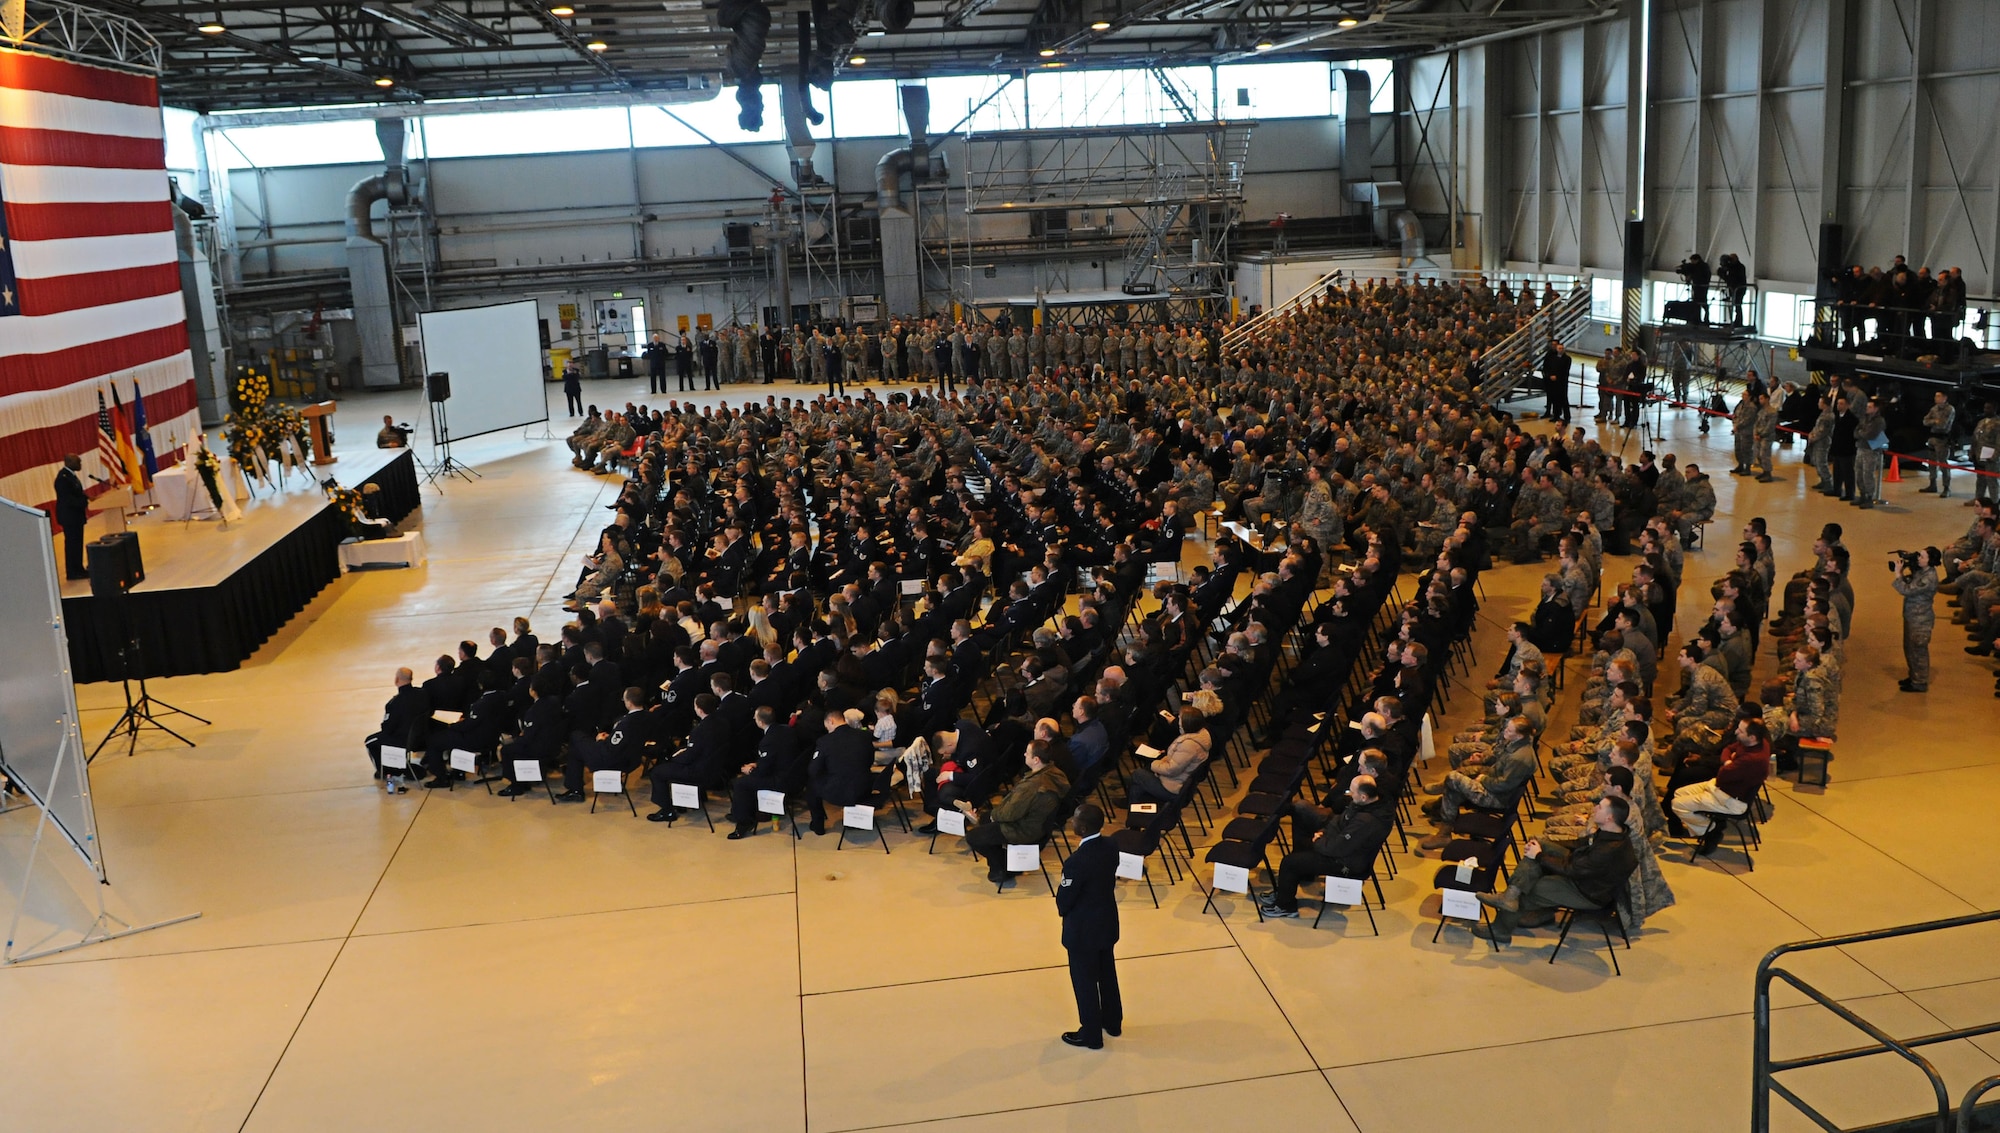 U.S. Air Force Lt. Col. Uduak Udoaka, 86th Vehicle Readiness Squadron commander, delivers his message during the memorial service for Airman 1st Class Zachary Cuddeback, 86th Vehicle Readiness Squadron, Ramstein Air Base, Germany, March 9, 2011. Aiman Cuddeback was killed in action at Frankfurt International Airport March 2, 2011. (U.S. Air Force photo by Airman 1st Class Desiree Whitney Esposito)